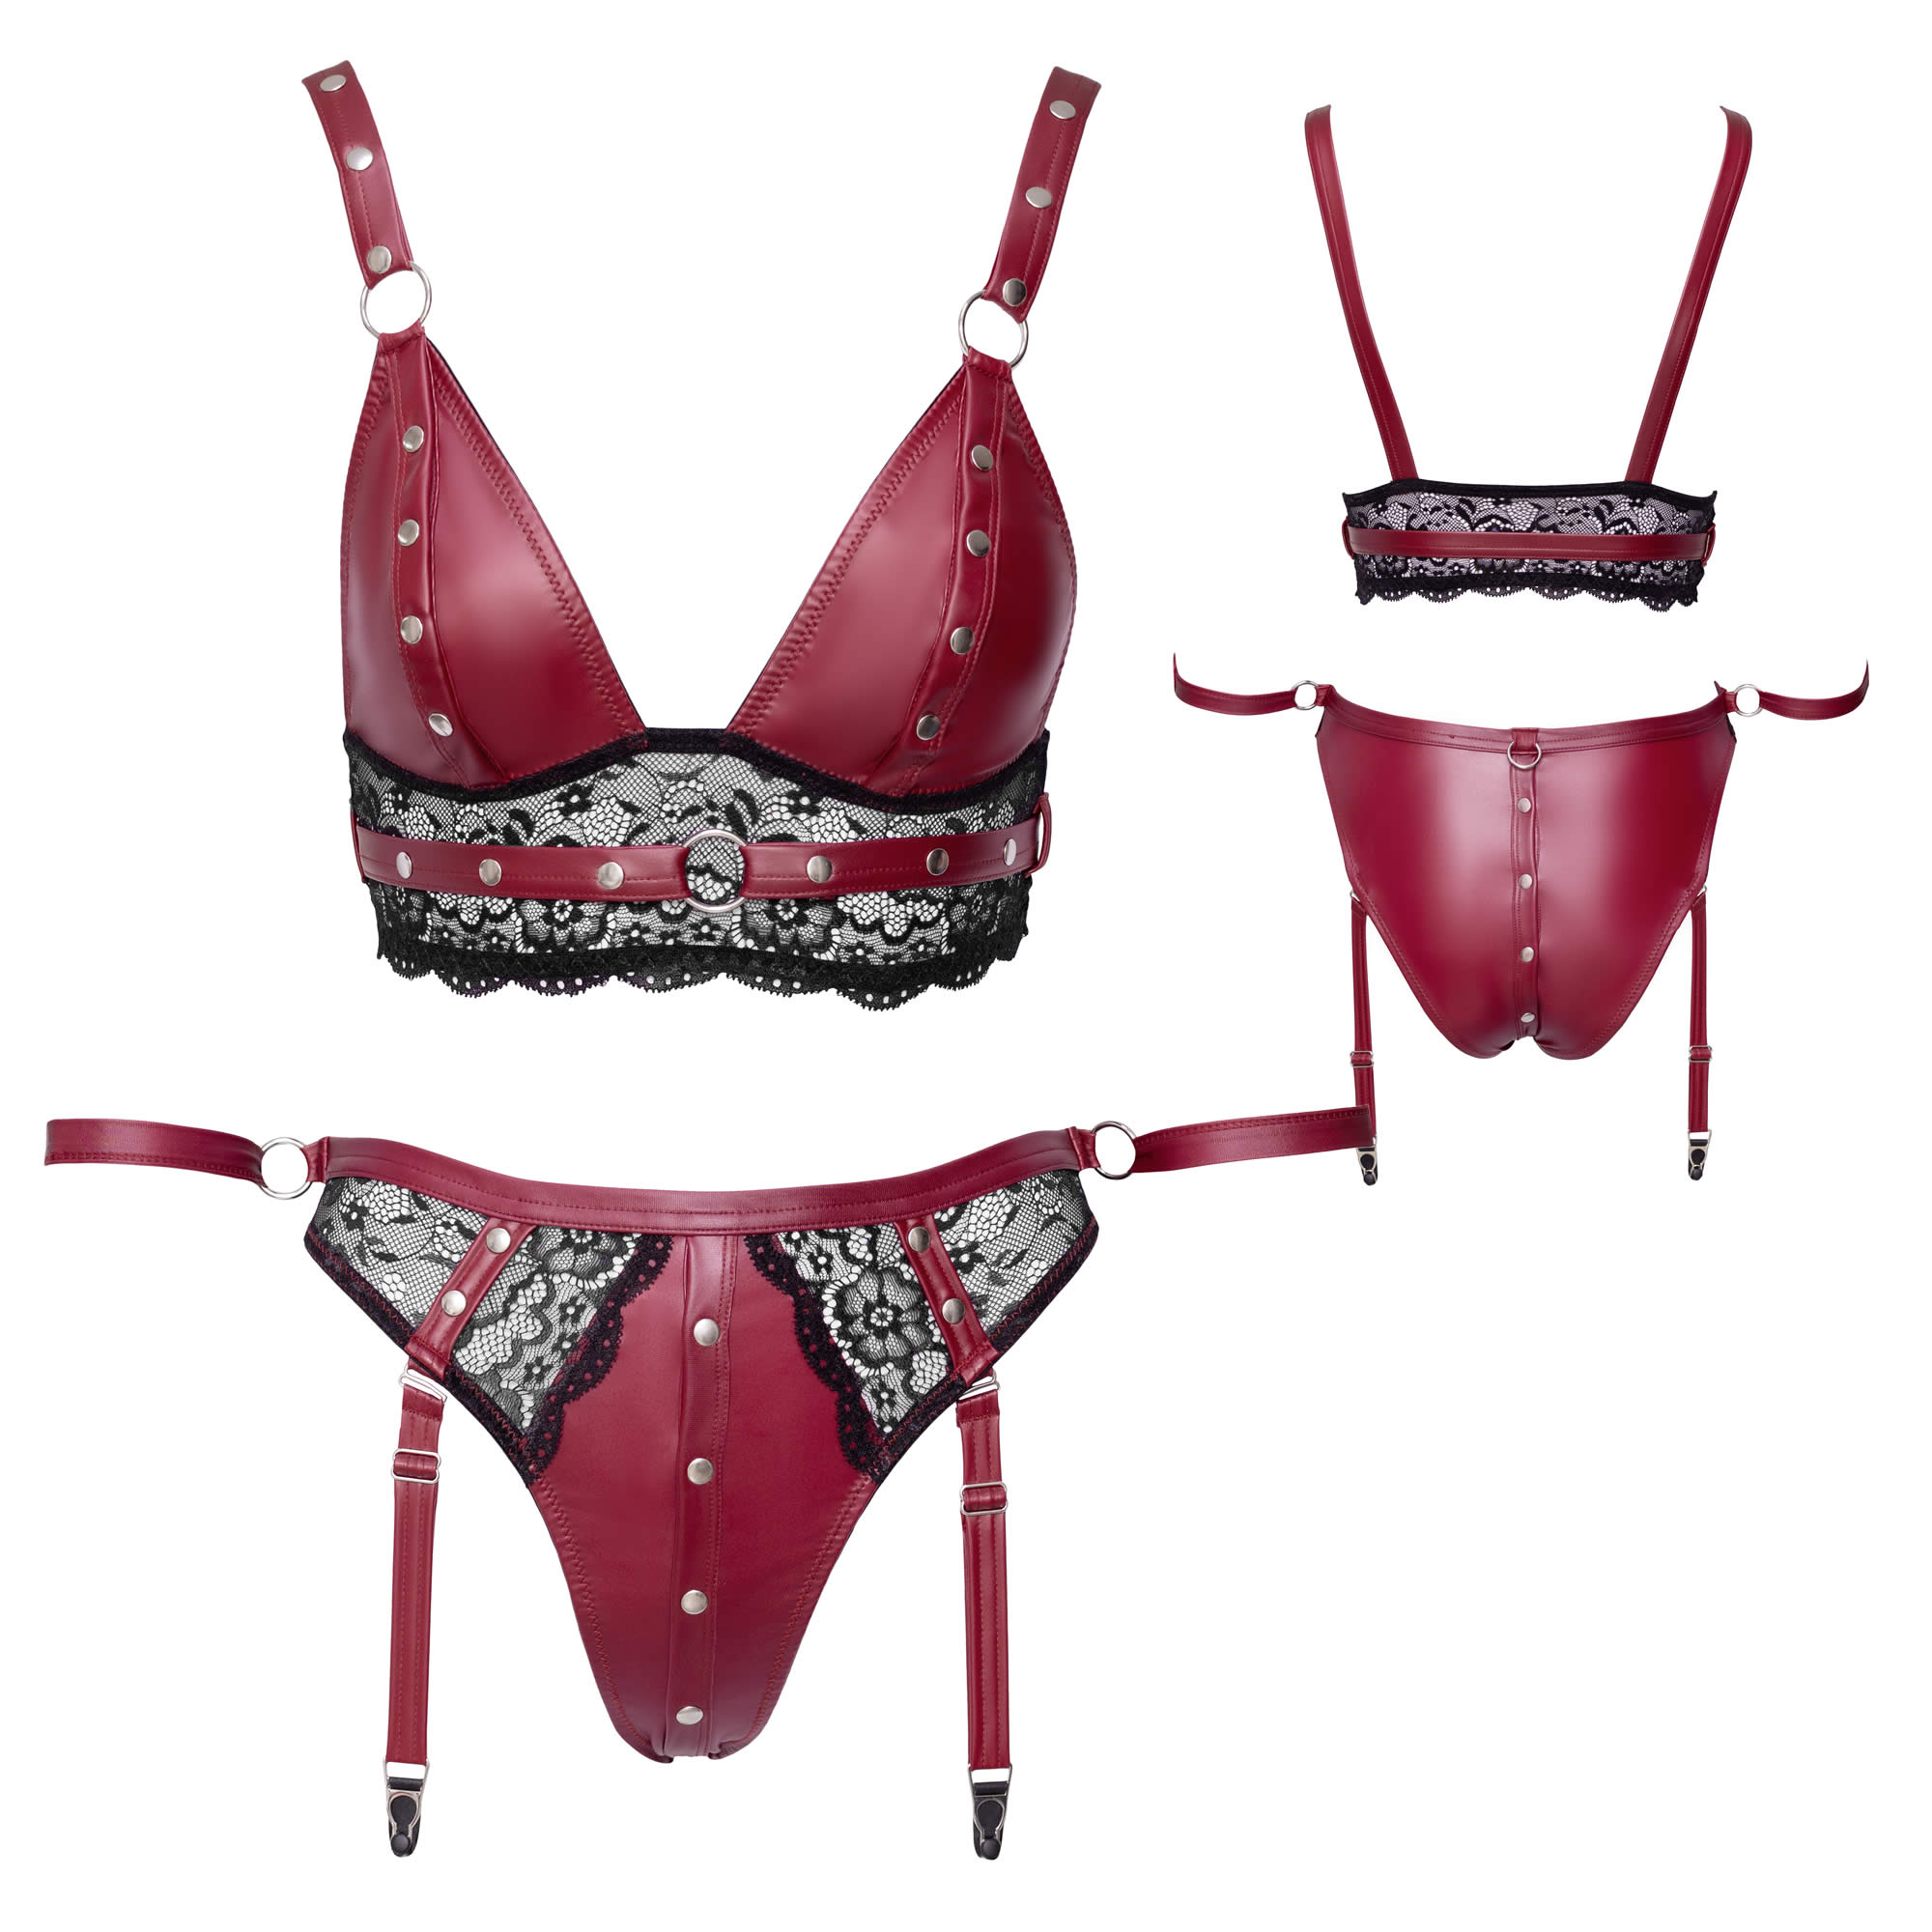 Red Wetlook Lingerie Set with Bralette, Cuffs and Lace